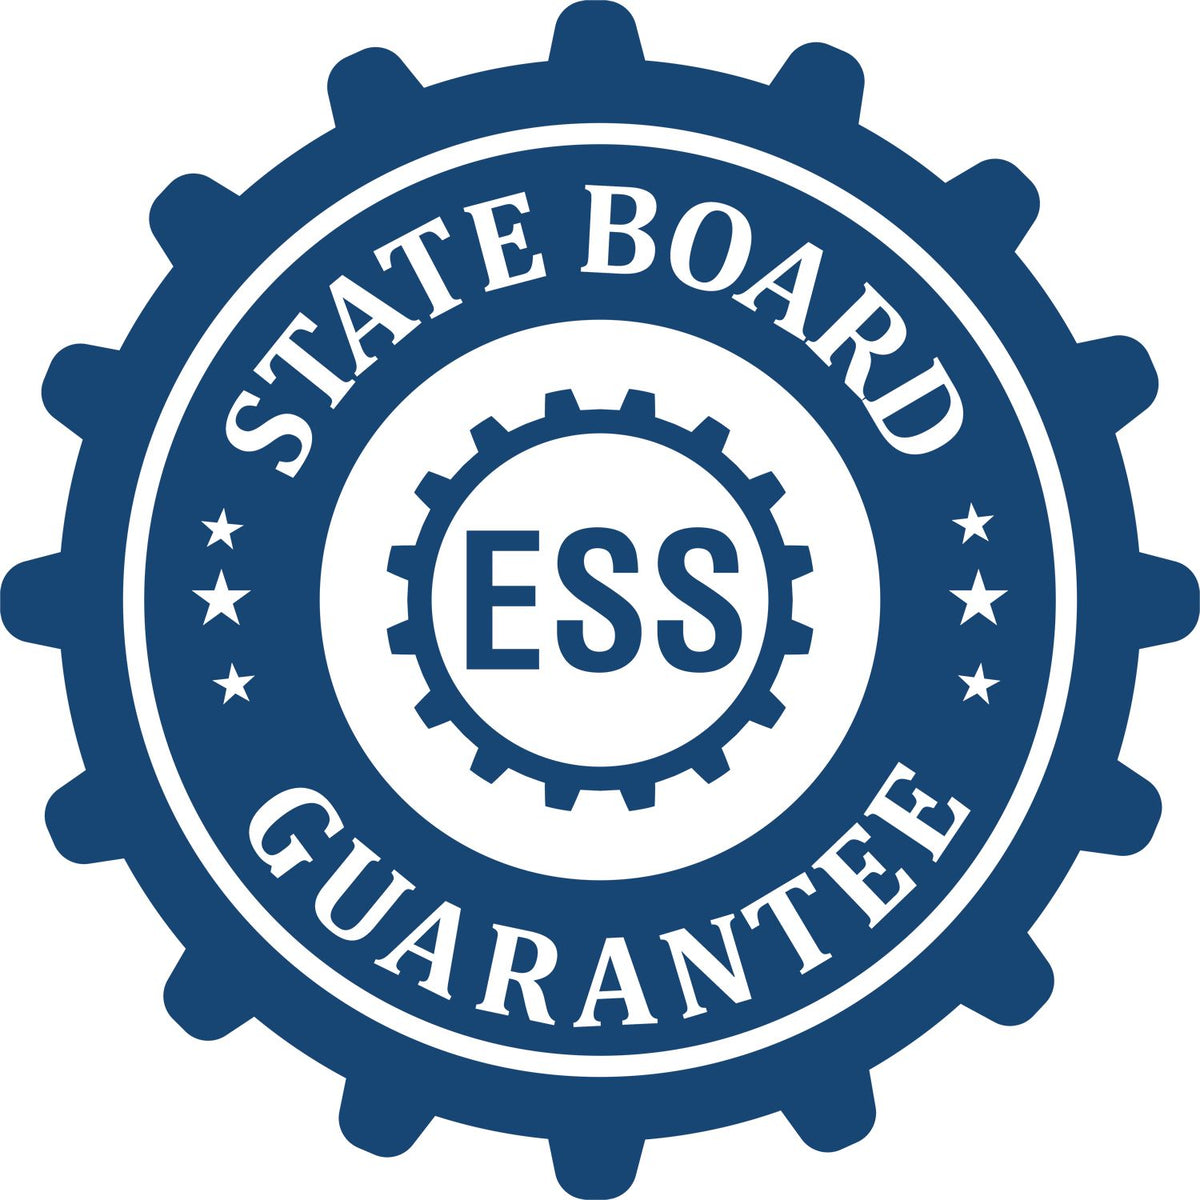 An emblem in a gear shape illustrating a state board guarantee for the Hybrid Illinois Architect Seal